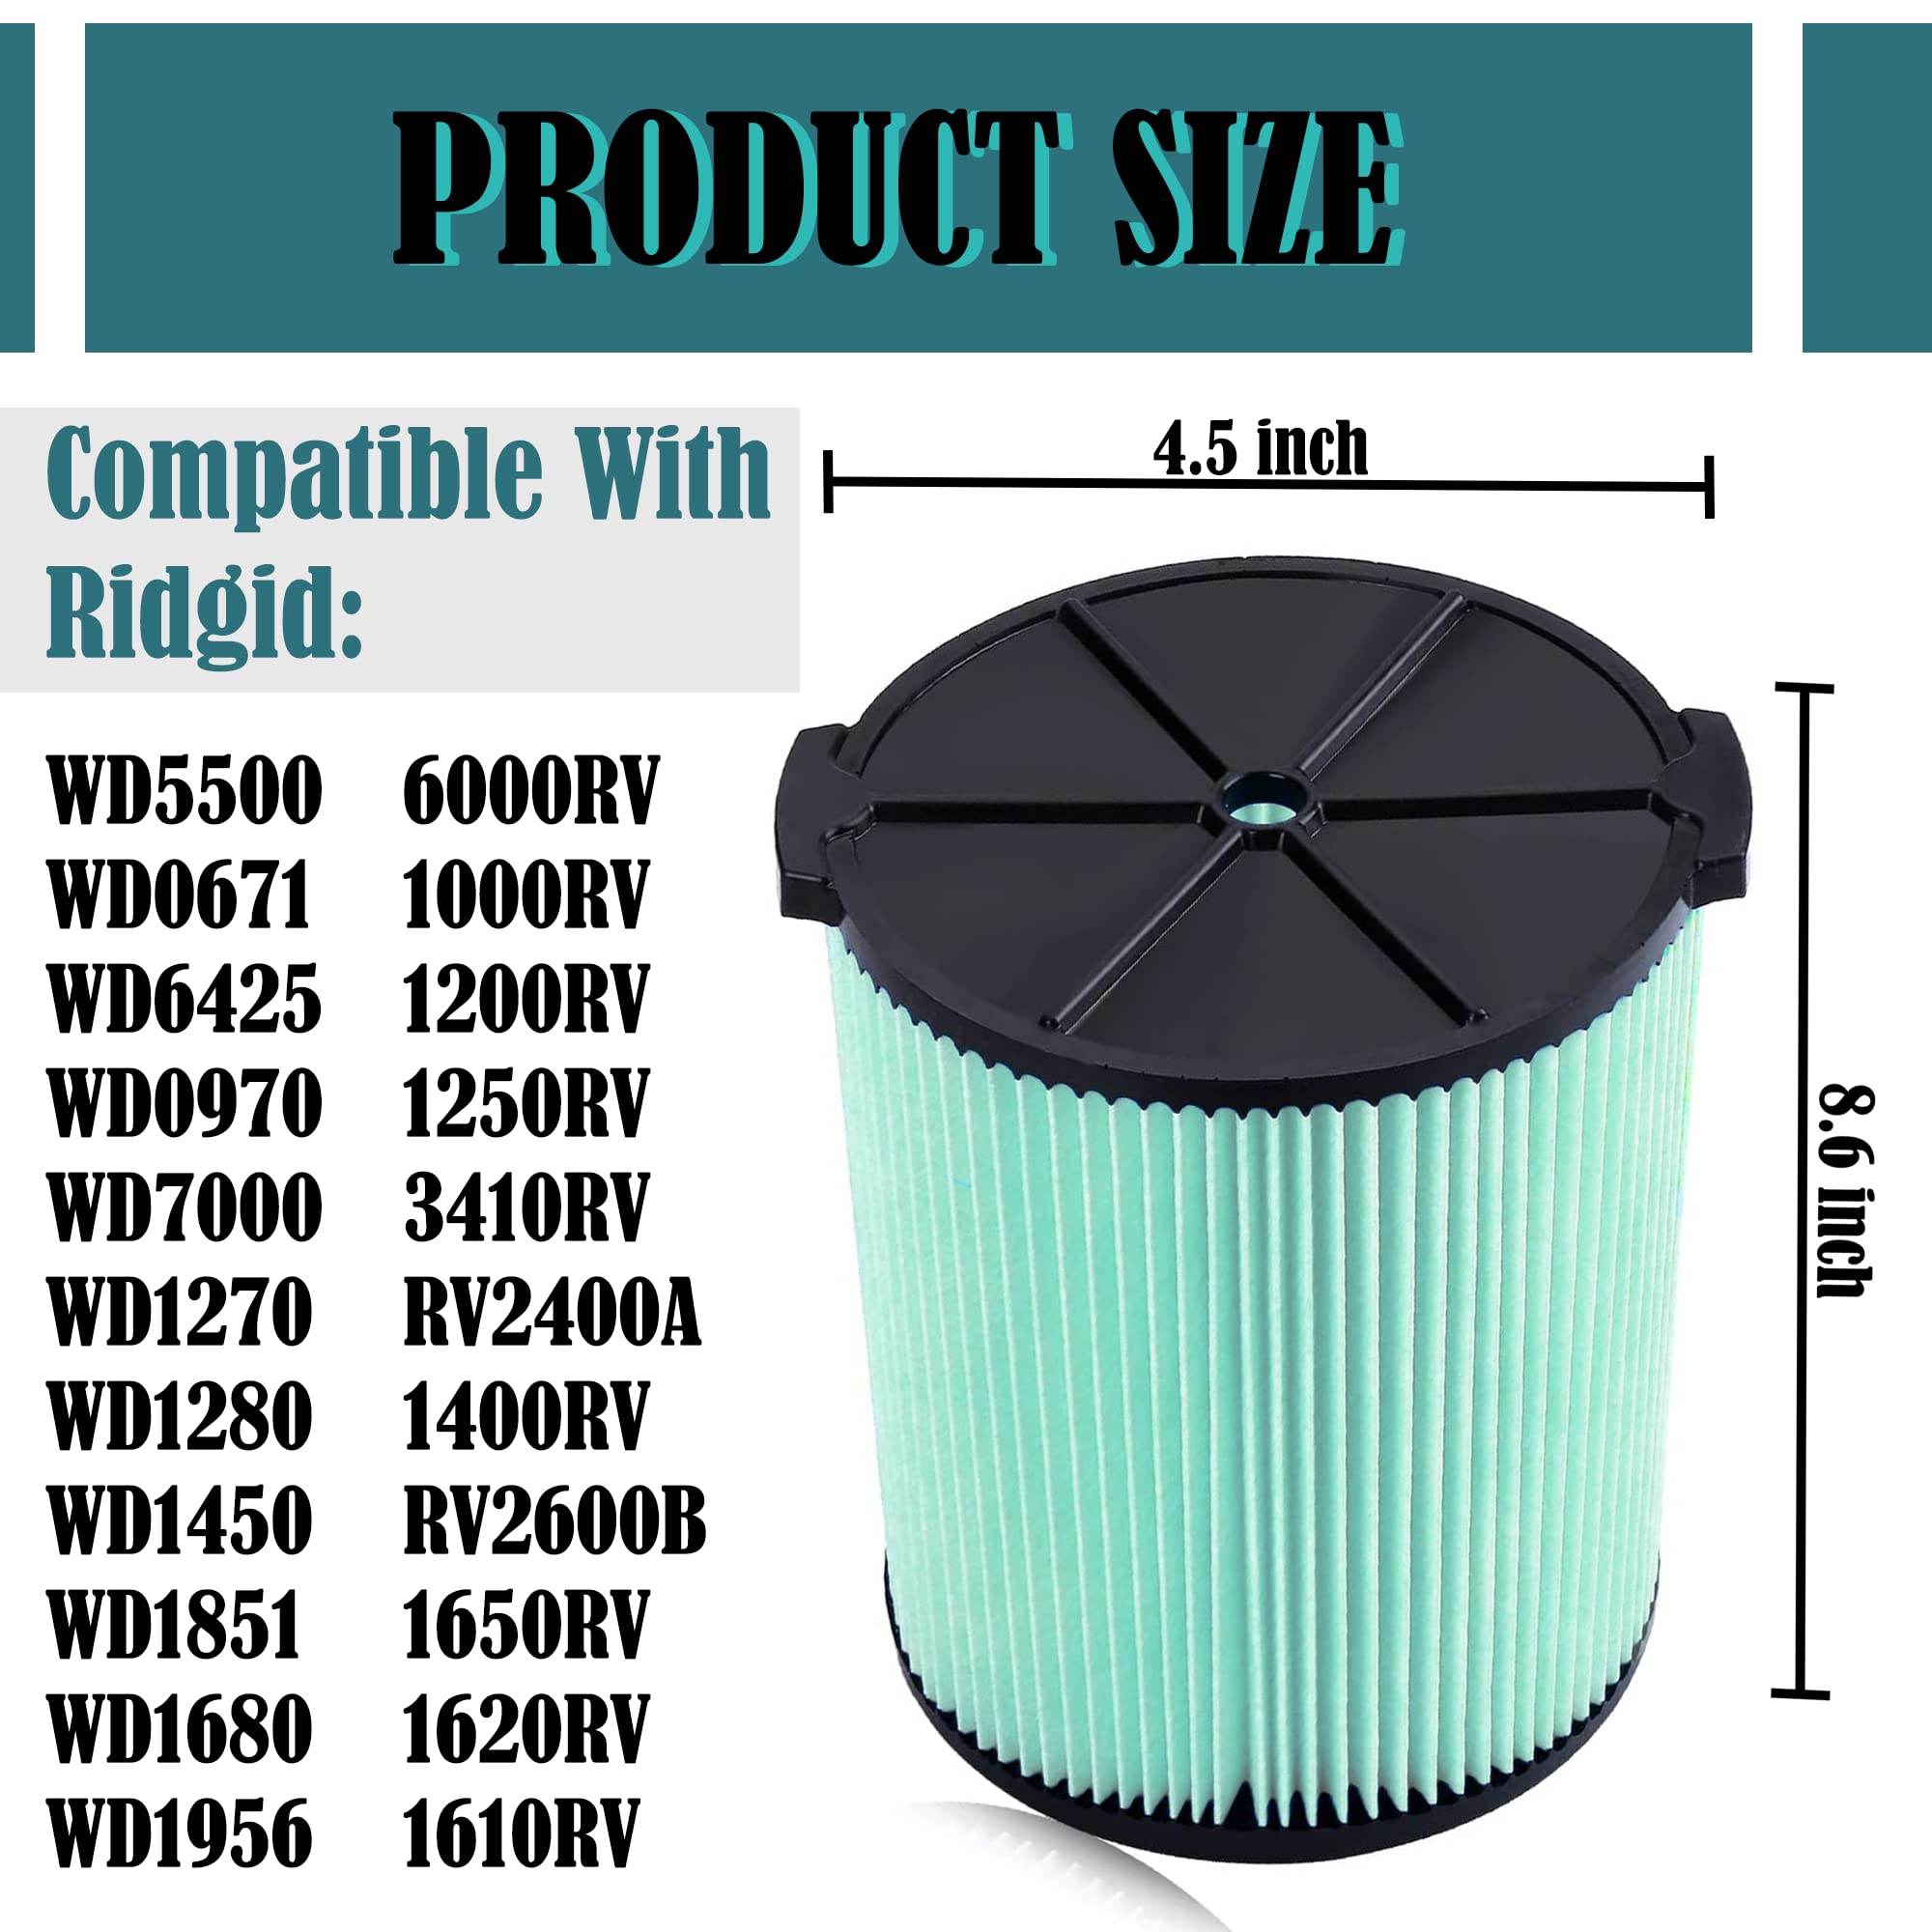 5-Layer Replacement Vacuum Filter VF6000 Compatible with Ridgid Wet/Dry Shop Vac 5-20 Gallon Vacuums WD5500 WD0671 WD6425 WD7000 WD1280 WD1851 WD1680 WD1956 RV2400A 1400RV RV2600B